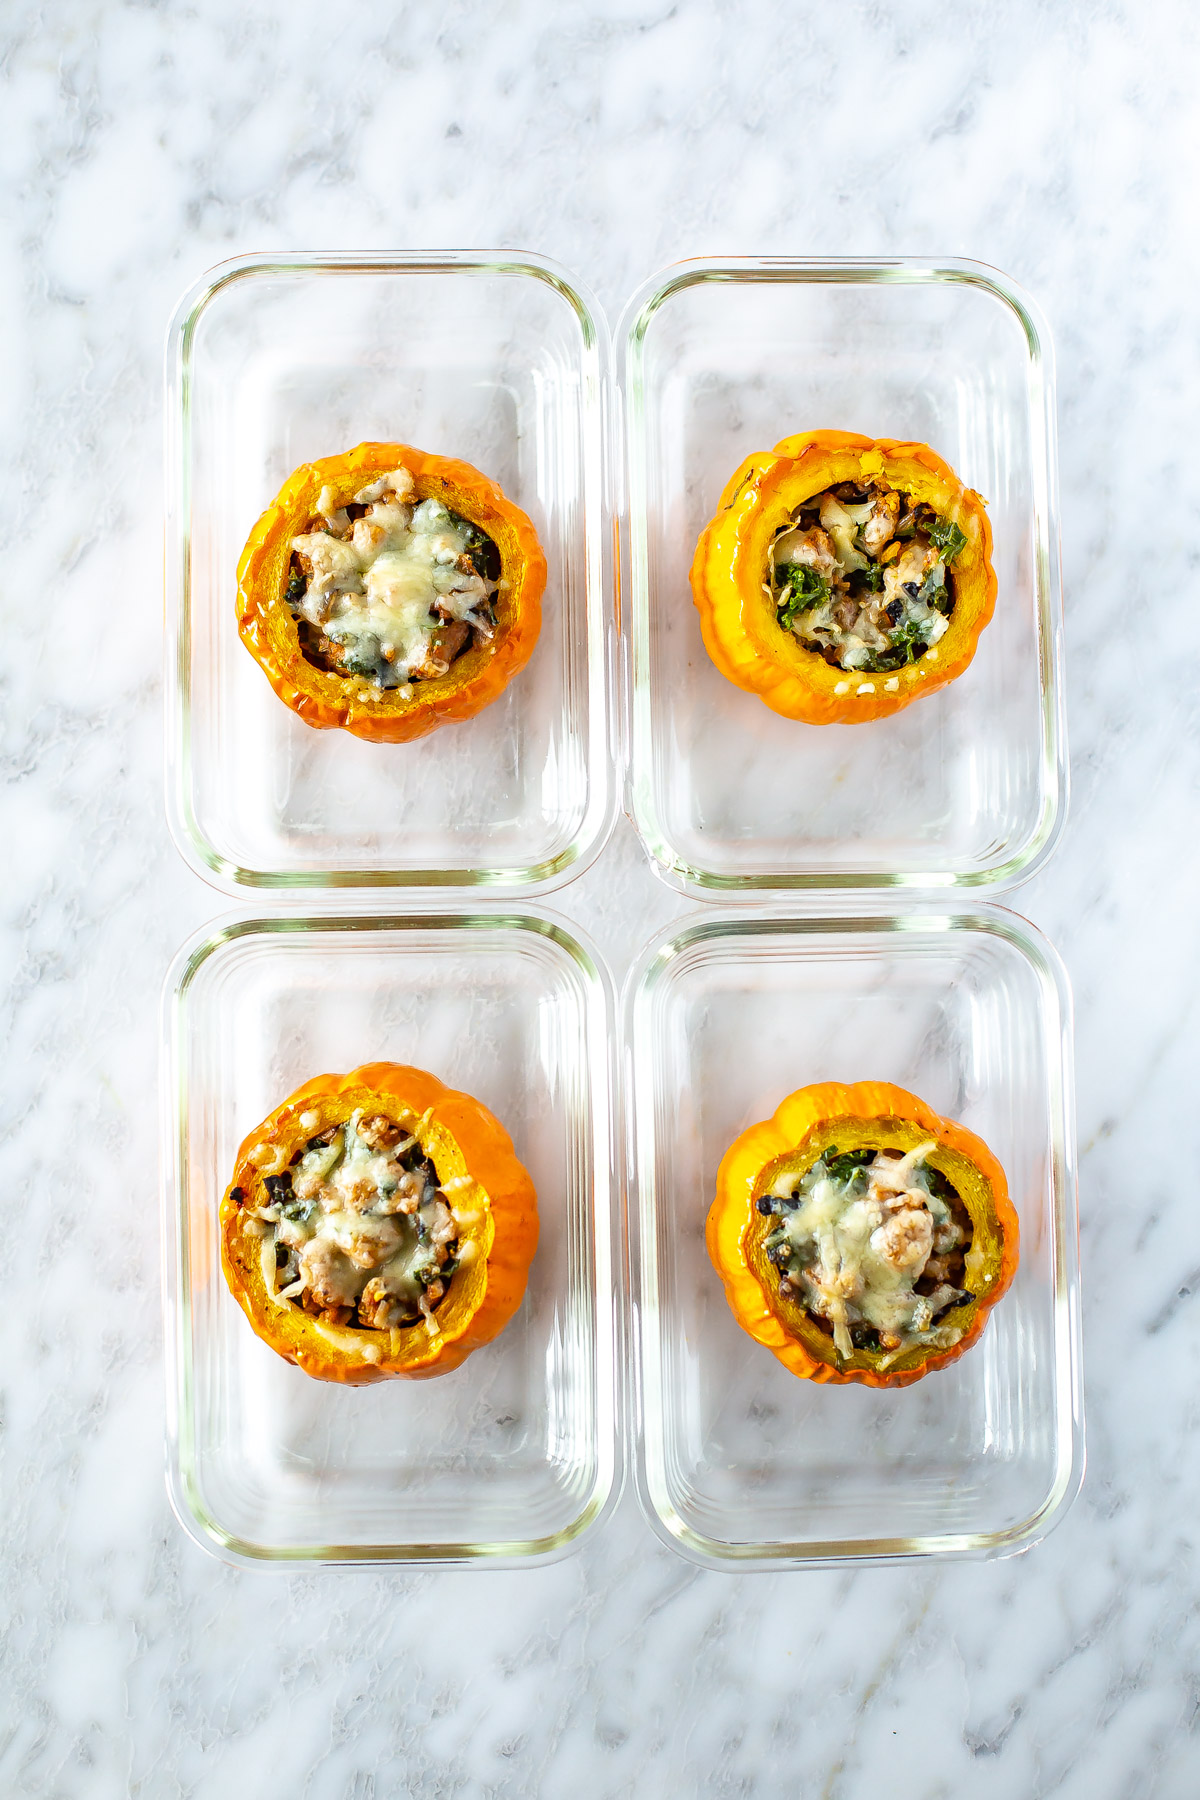 Four meal prep containers, each with a mini stuffed pumpkin inside.